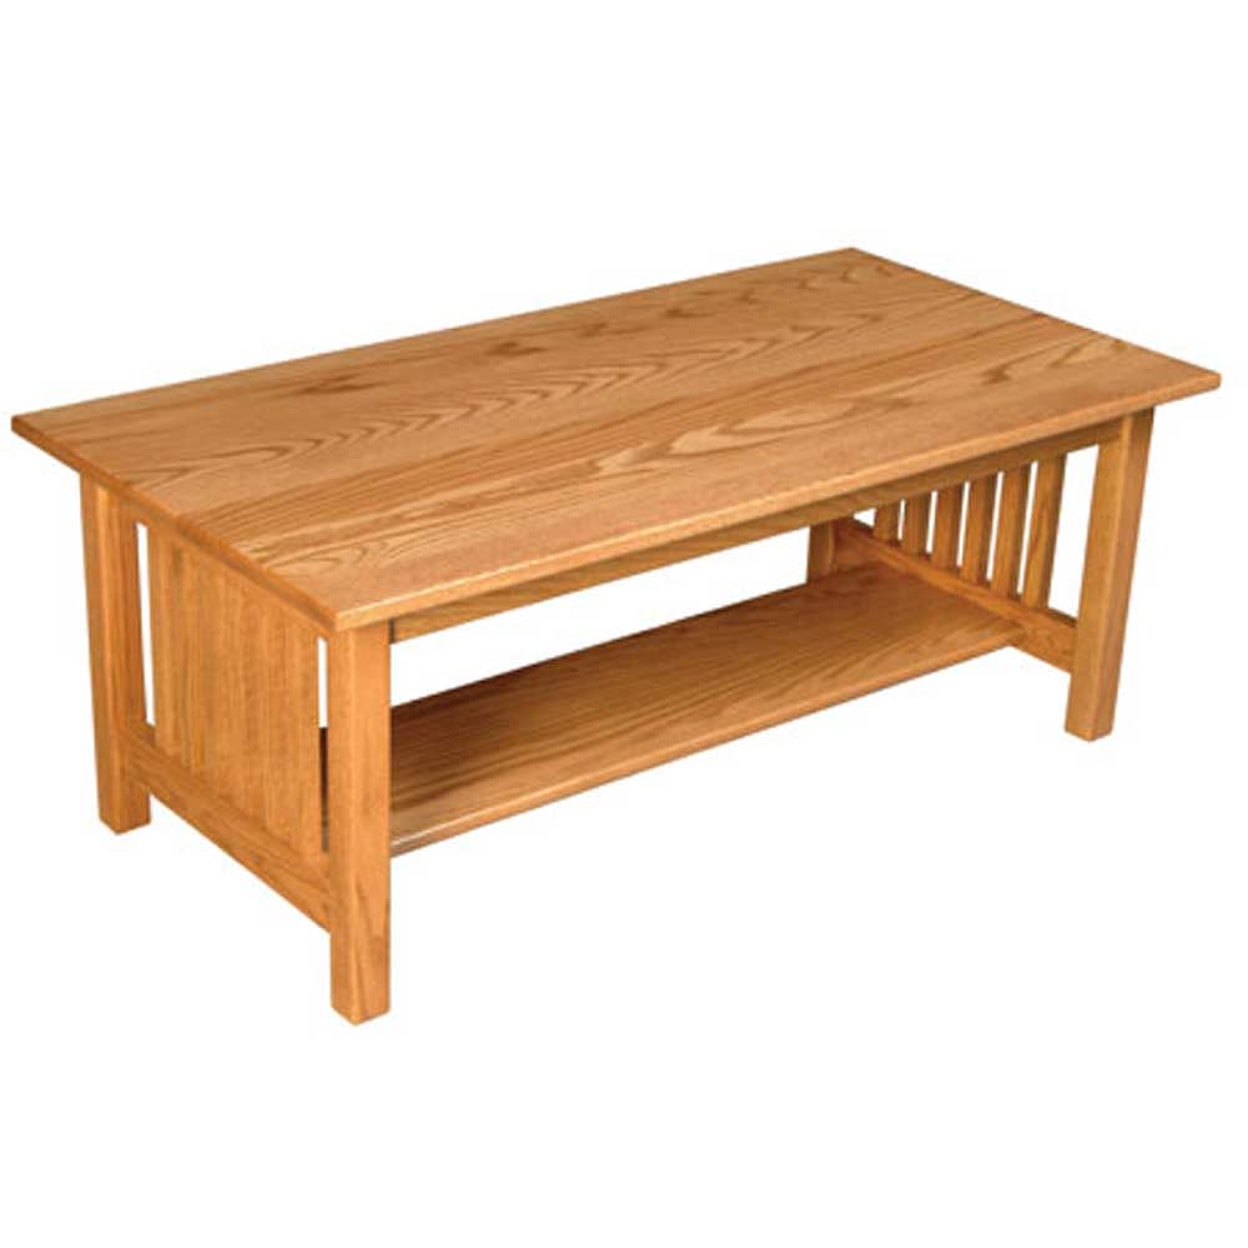 Simply Amish Mission Amish Coffee Table